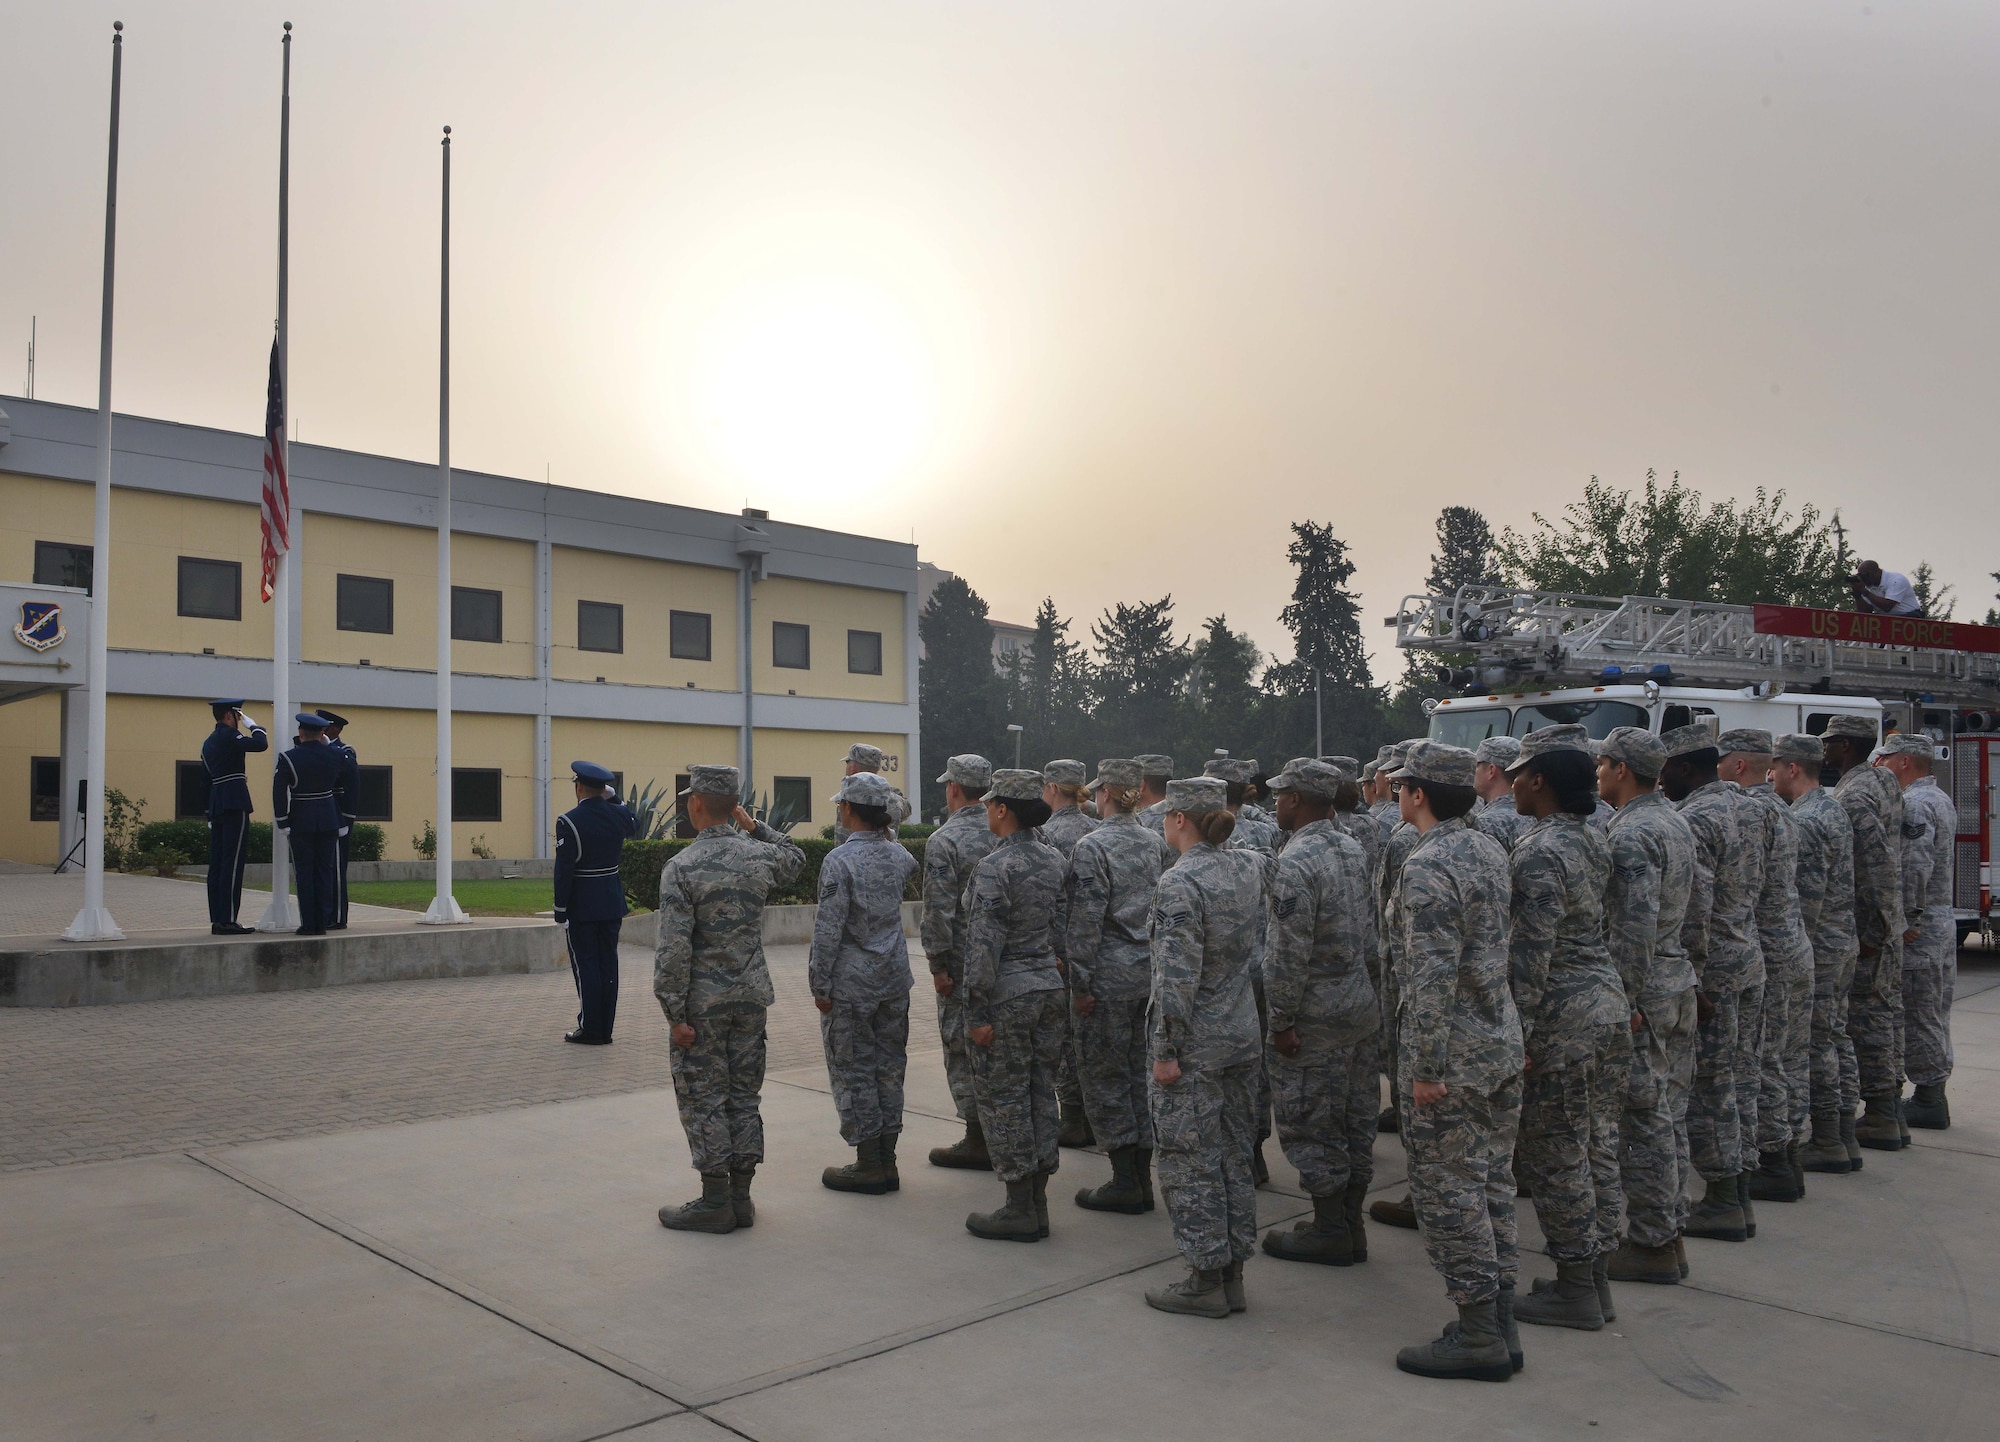 Airmen from the 39th Air Base Wing participate in a 9/11 Remembrance Ceremony Sept. 11, 2015, at Incirlik Air Base, Turkey. Service members from the Turkish air force, Spanish Patriot Unit and the 39th ABW attended the event to honor and remember the victims of the attacks that occurred on Sept. 11, 2001. (U.S. Air Force photo/Senior Airman Michael Battles)